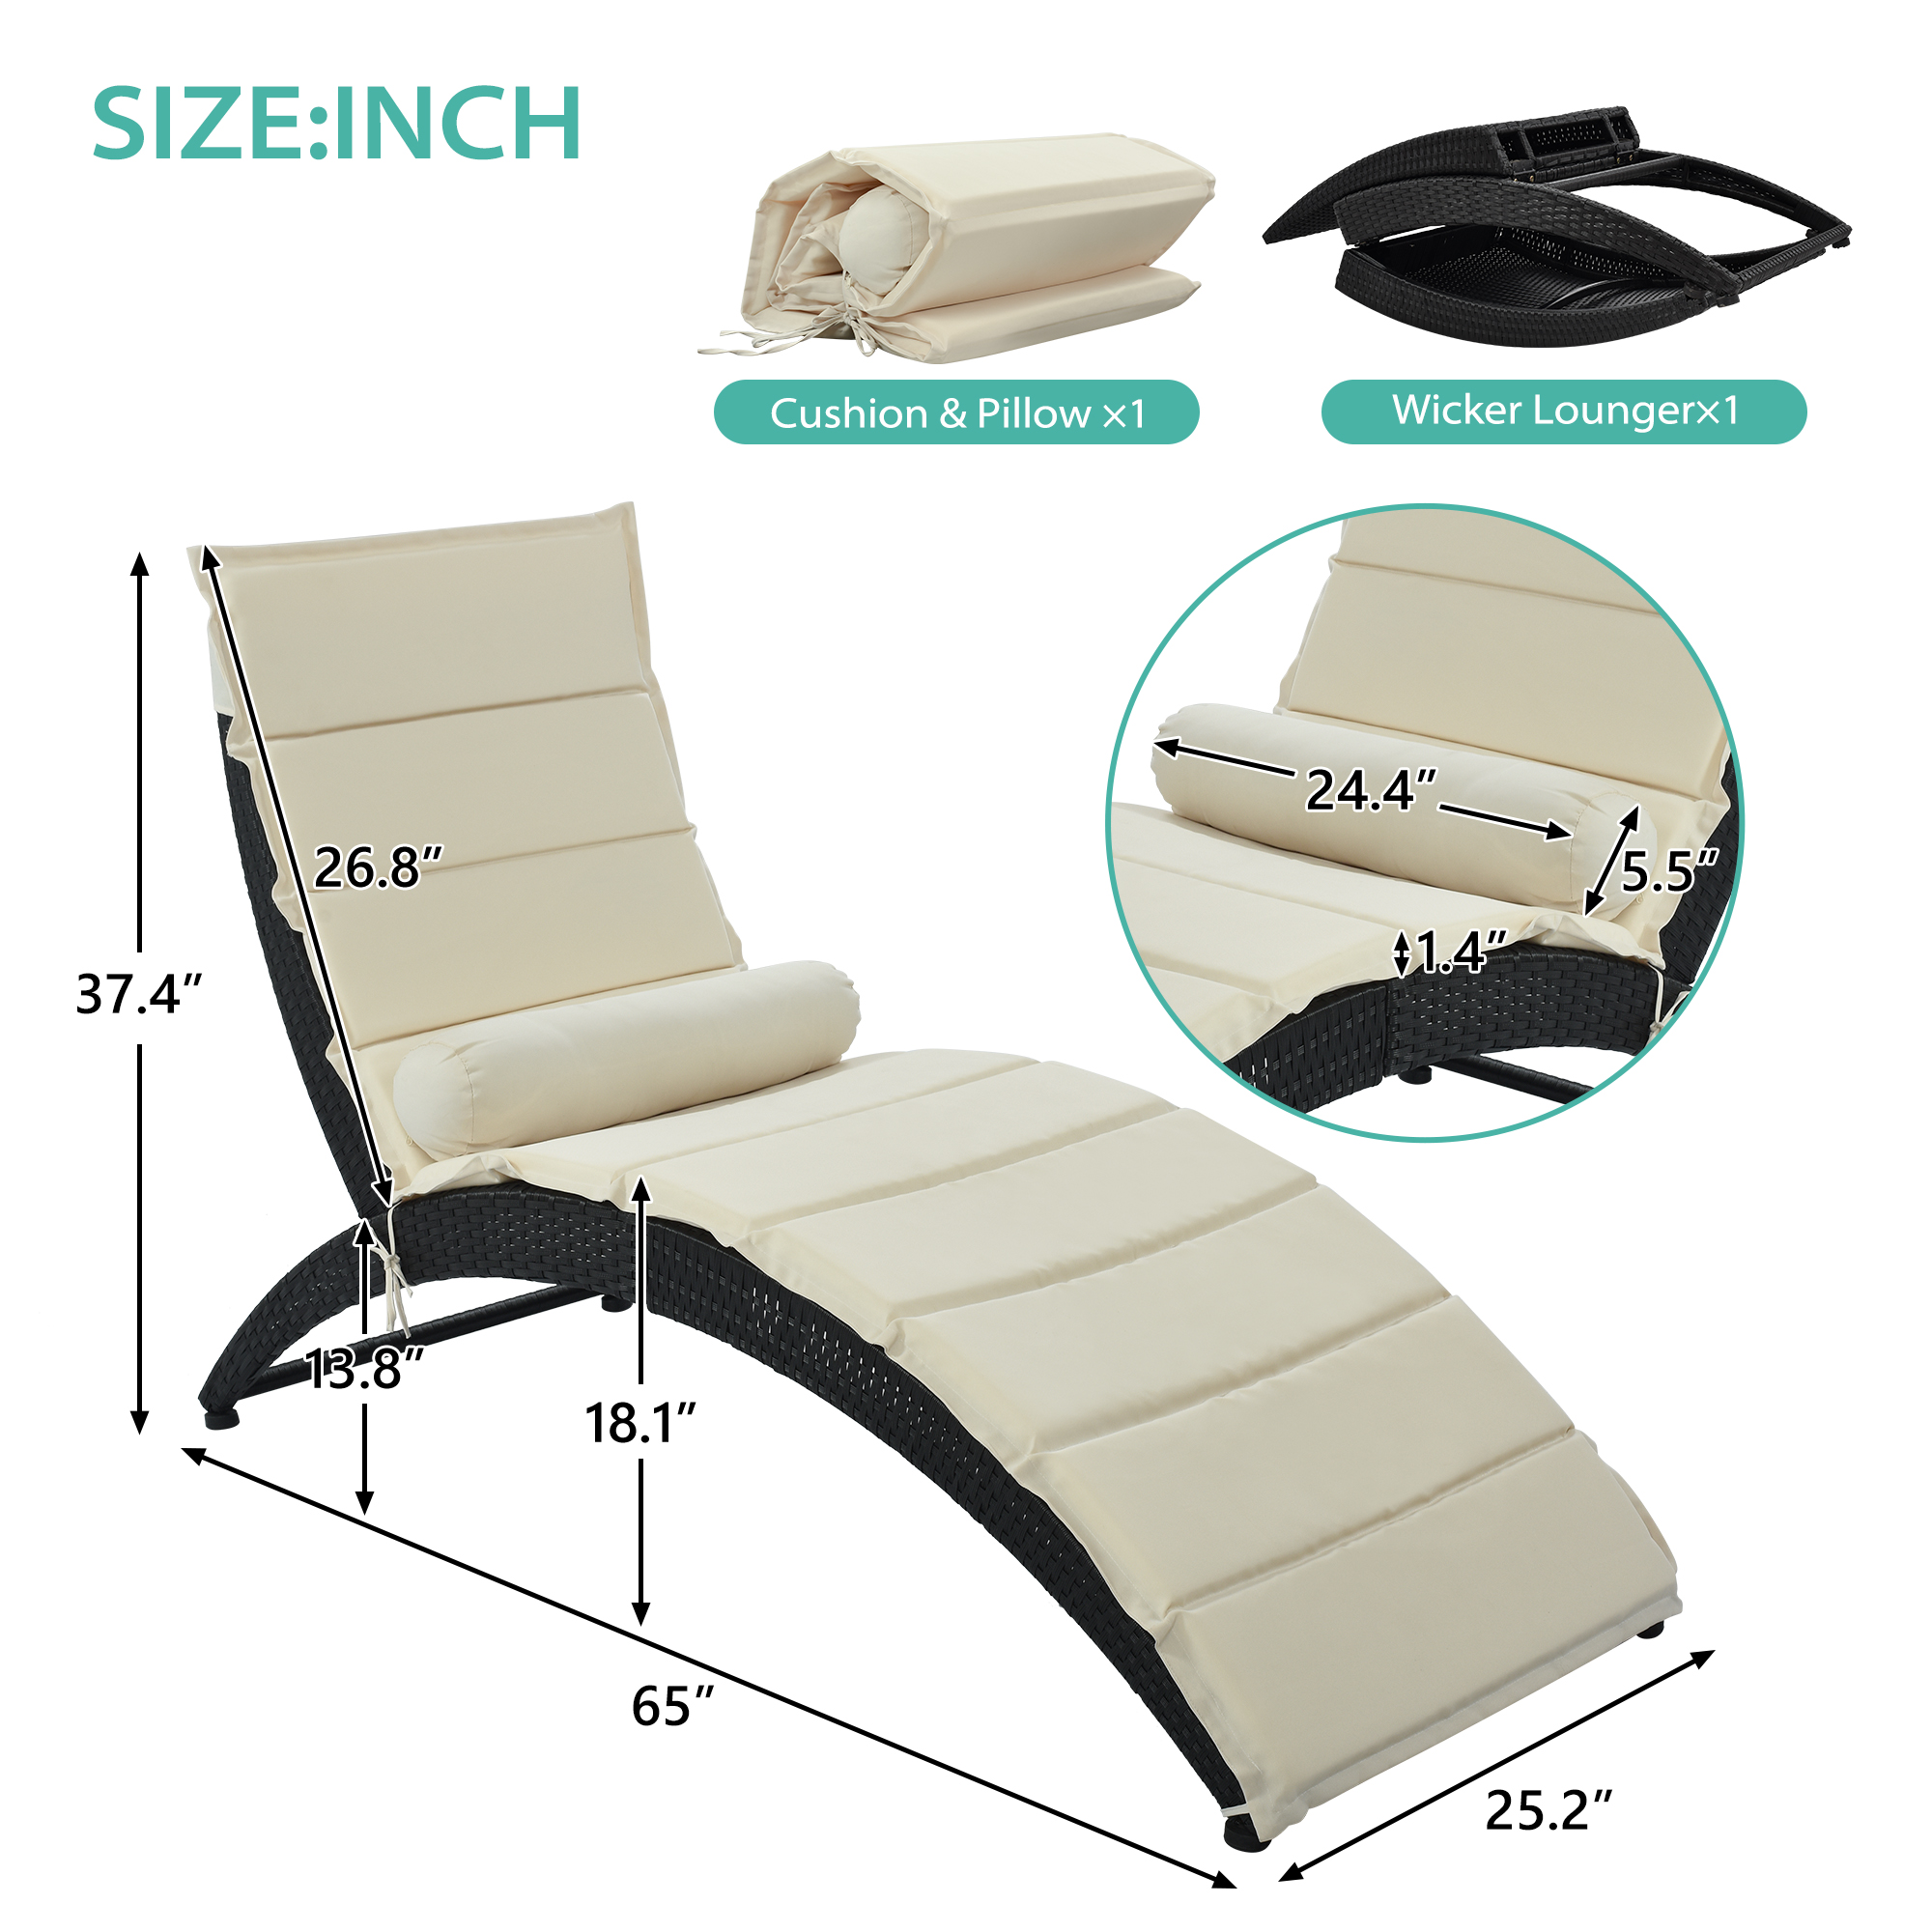 Patio Chaise Lounge, Folding Reclining Camping Chair, PE Rattan Sun Recliner Chair with Seat Cushion, Poolside Garden Outdoor Chaise Lounge Chairs, JA1105 - image 3 of 8